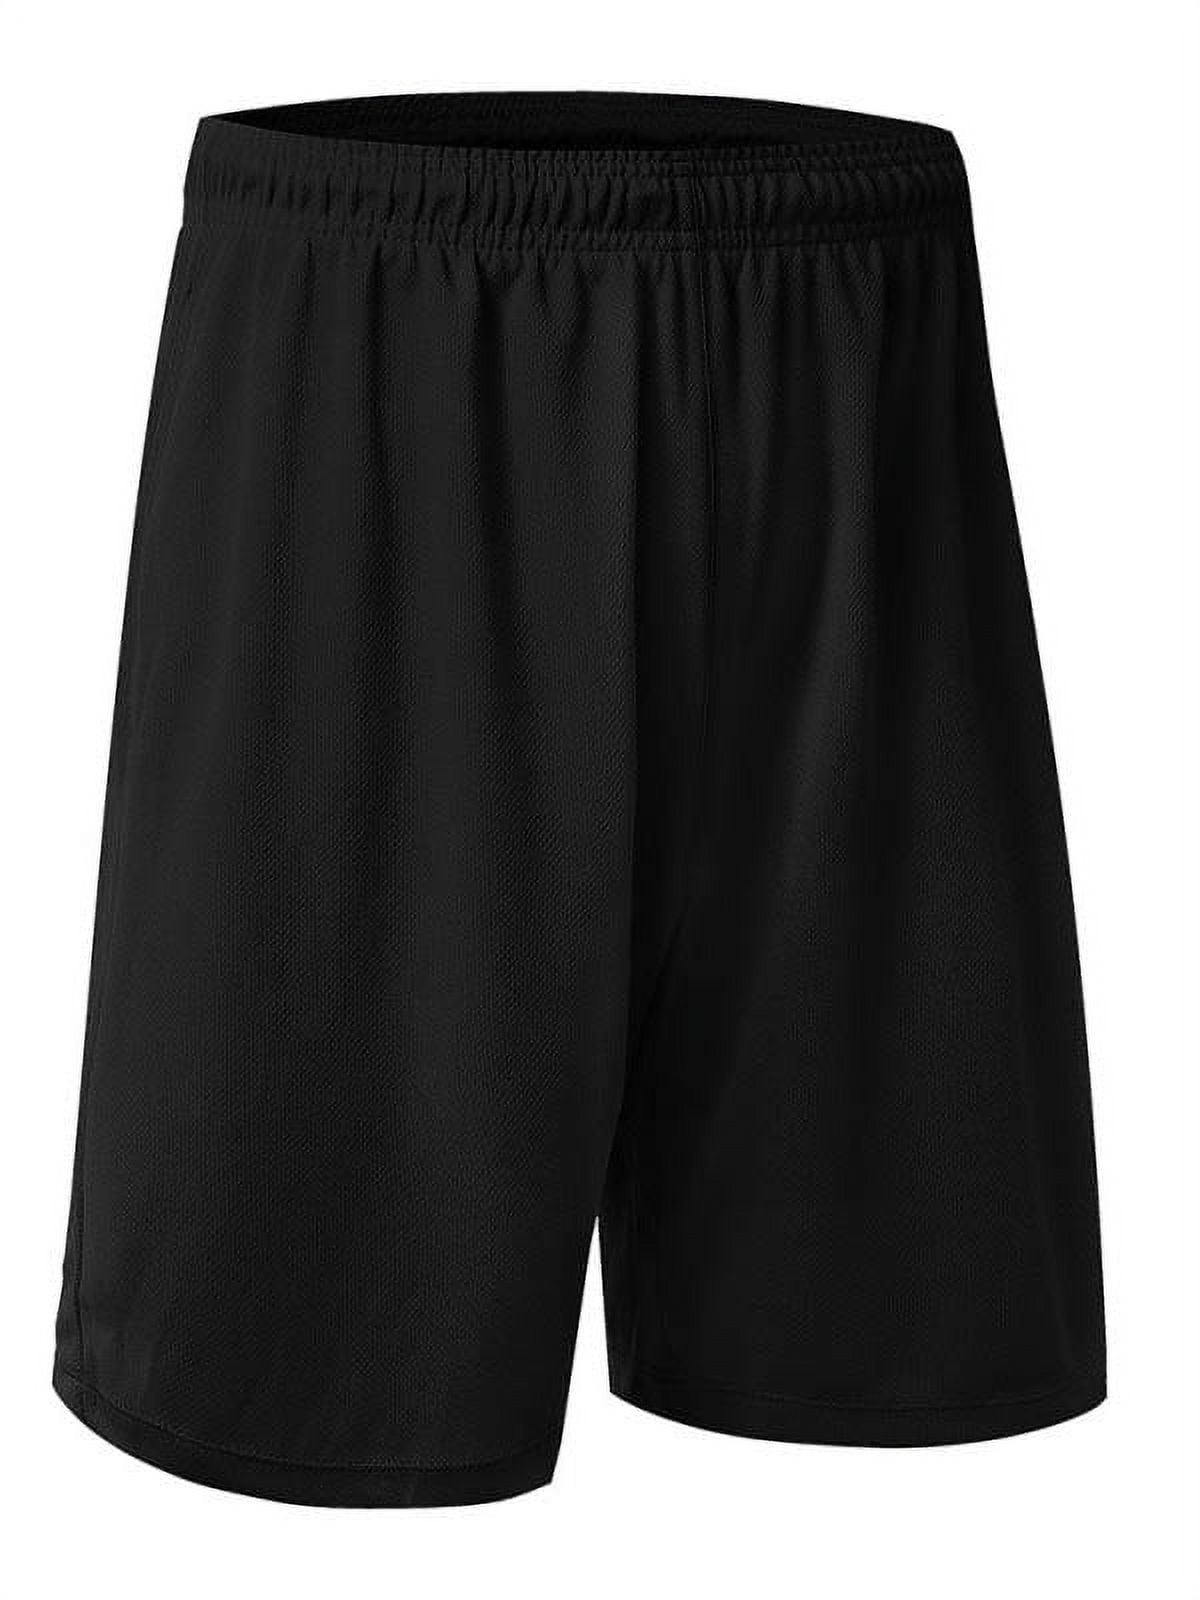 Mens Five Point Sports Running Half Pant Fast Dry, Lightweight, And  Breathable For Fitness, Jogging, Workouts, Casual Wear High Elasticity And  Comfortable From Buydhgatess, $37.06 | DHgate.Com